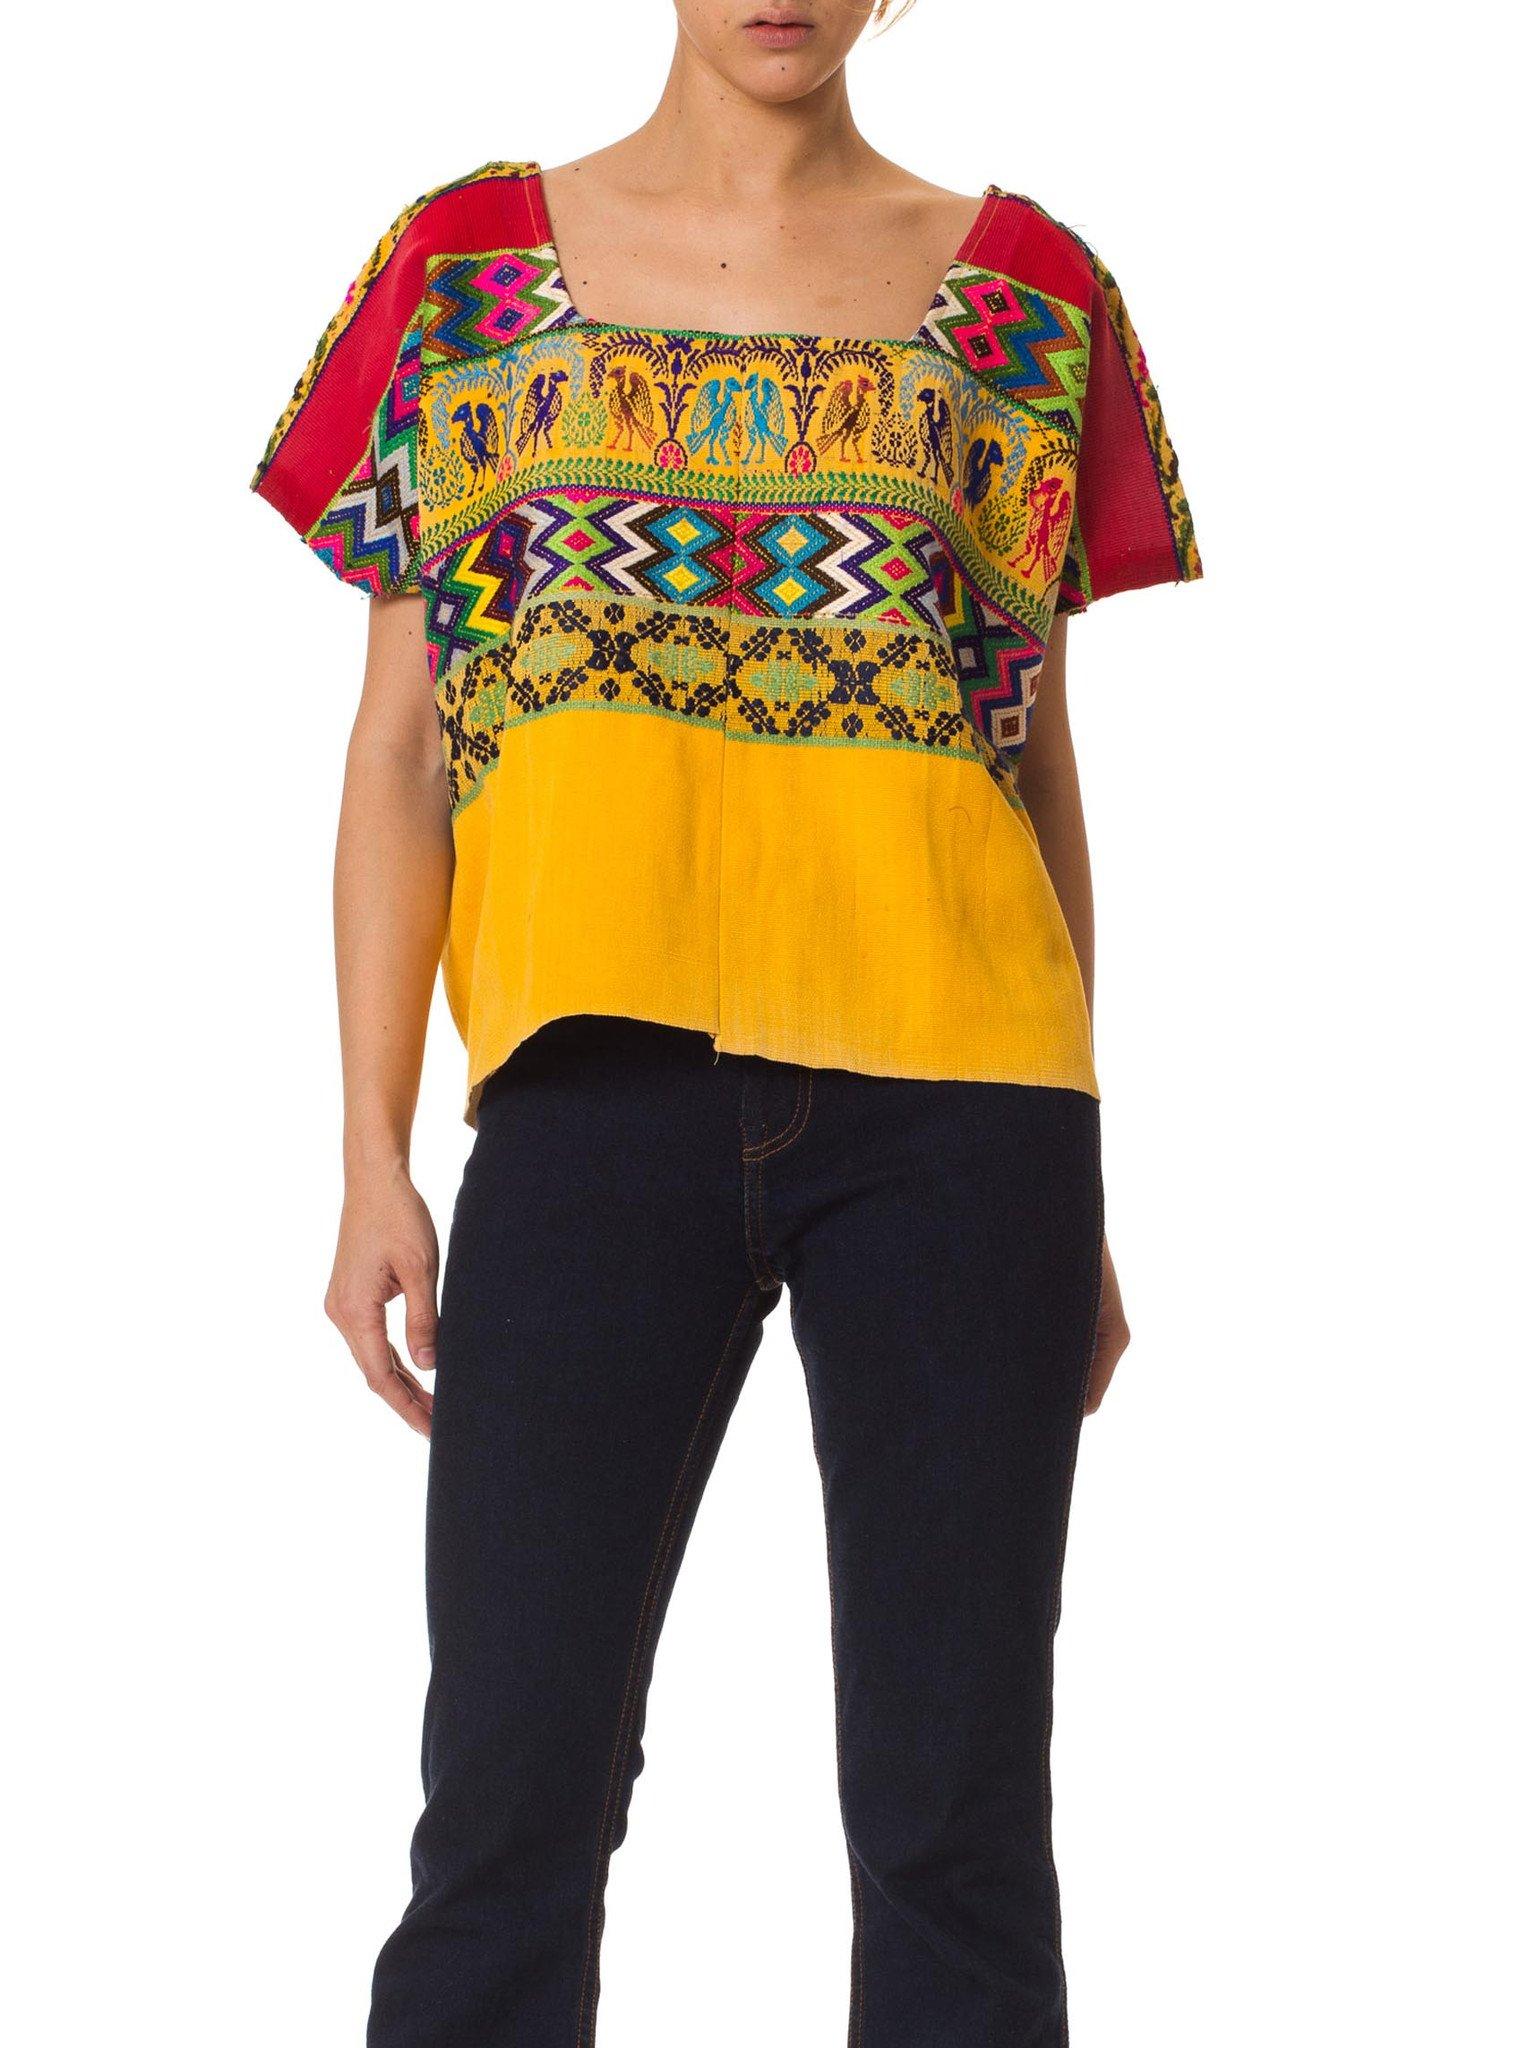 Women's 1970S Red & Yellow Cotton Top With Geometric Ethnic Hand Embroidery For Sale